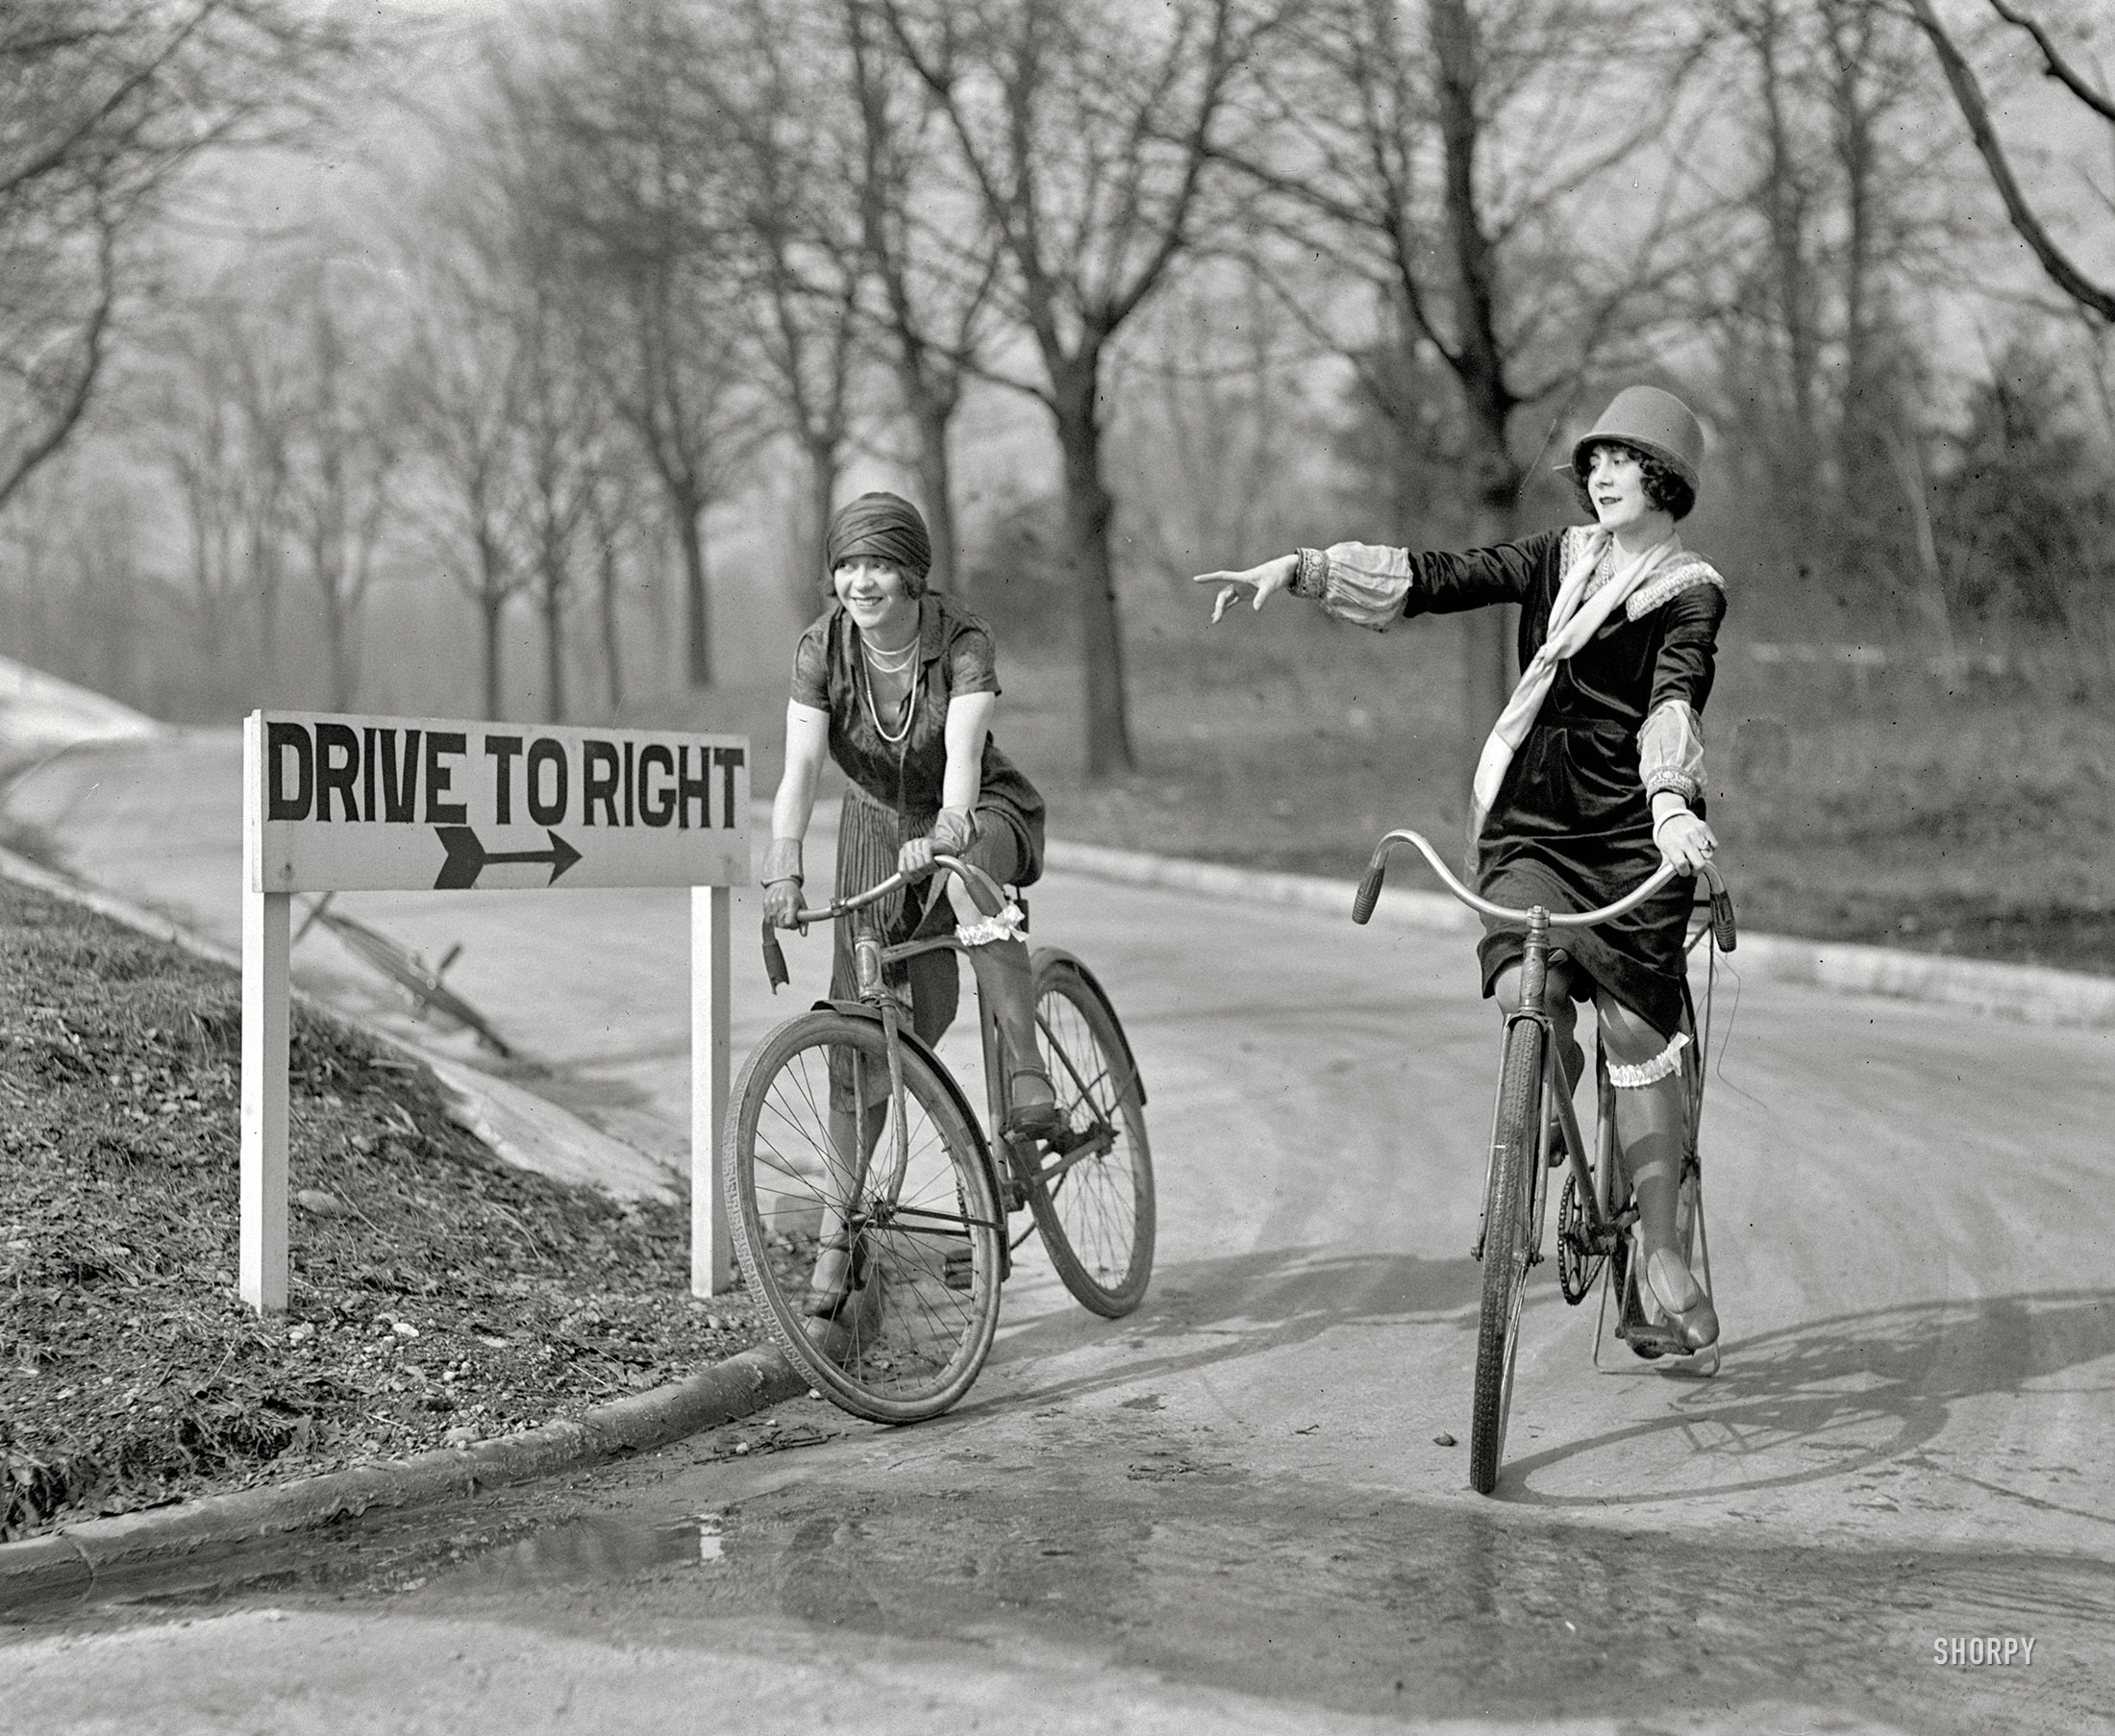 February 7, 1925. Washington, D.C. "Mildred Billert and Hazel Bowman of Ned Wayburn's Revue." National Photo Company glass negative. View full size.